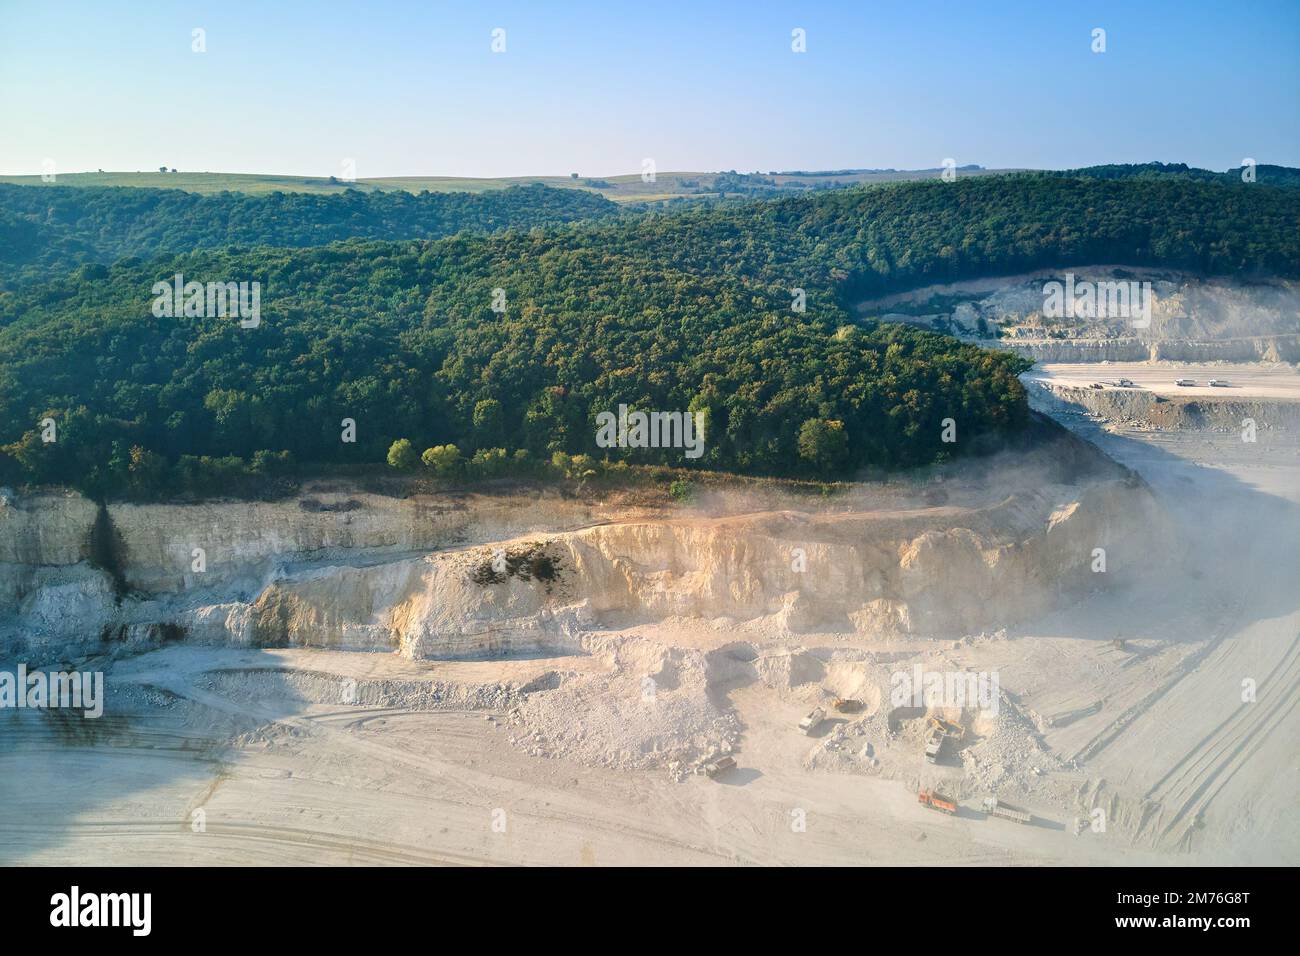 Aerial view of open pit mining site of limestone materials extraction for construction industry with excavators and dump trucks Stock Photo